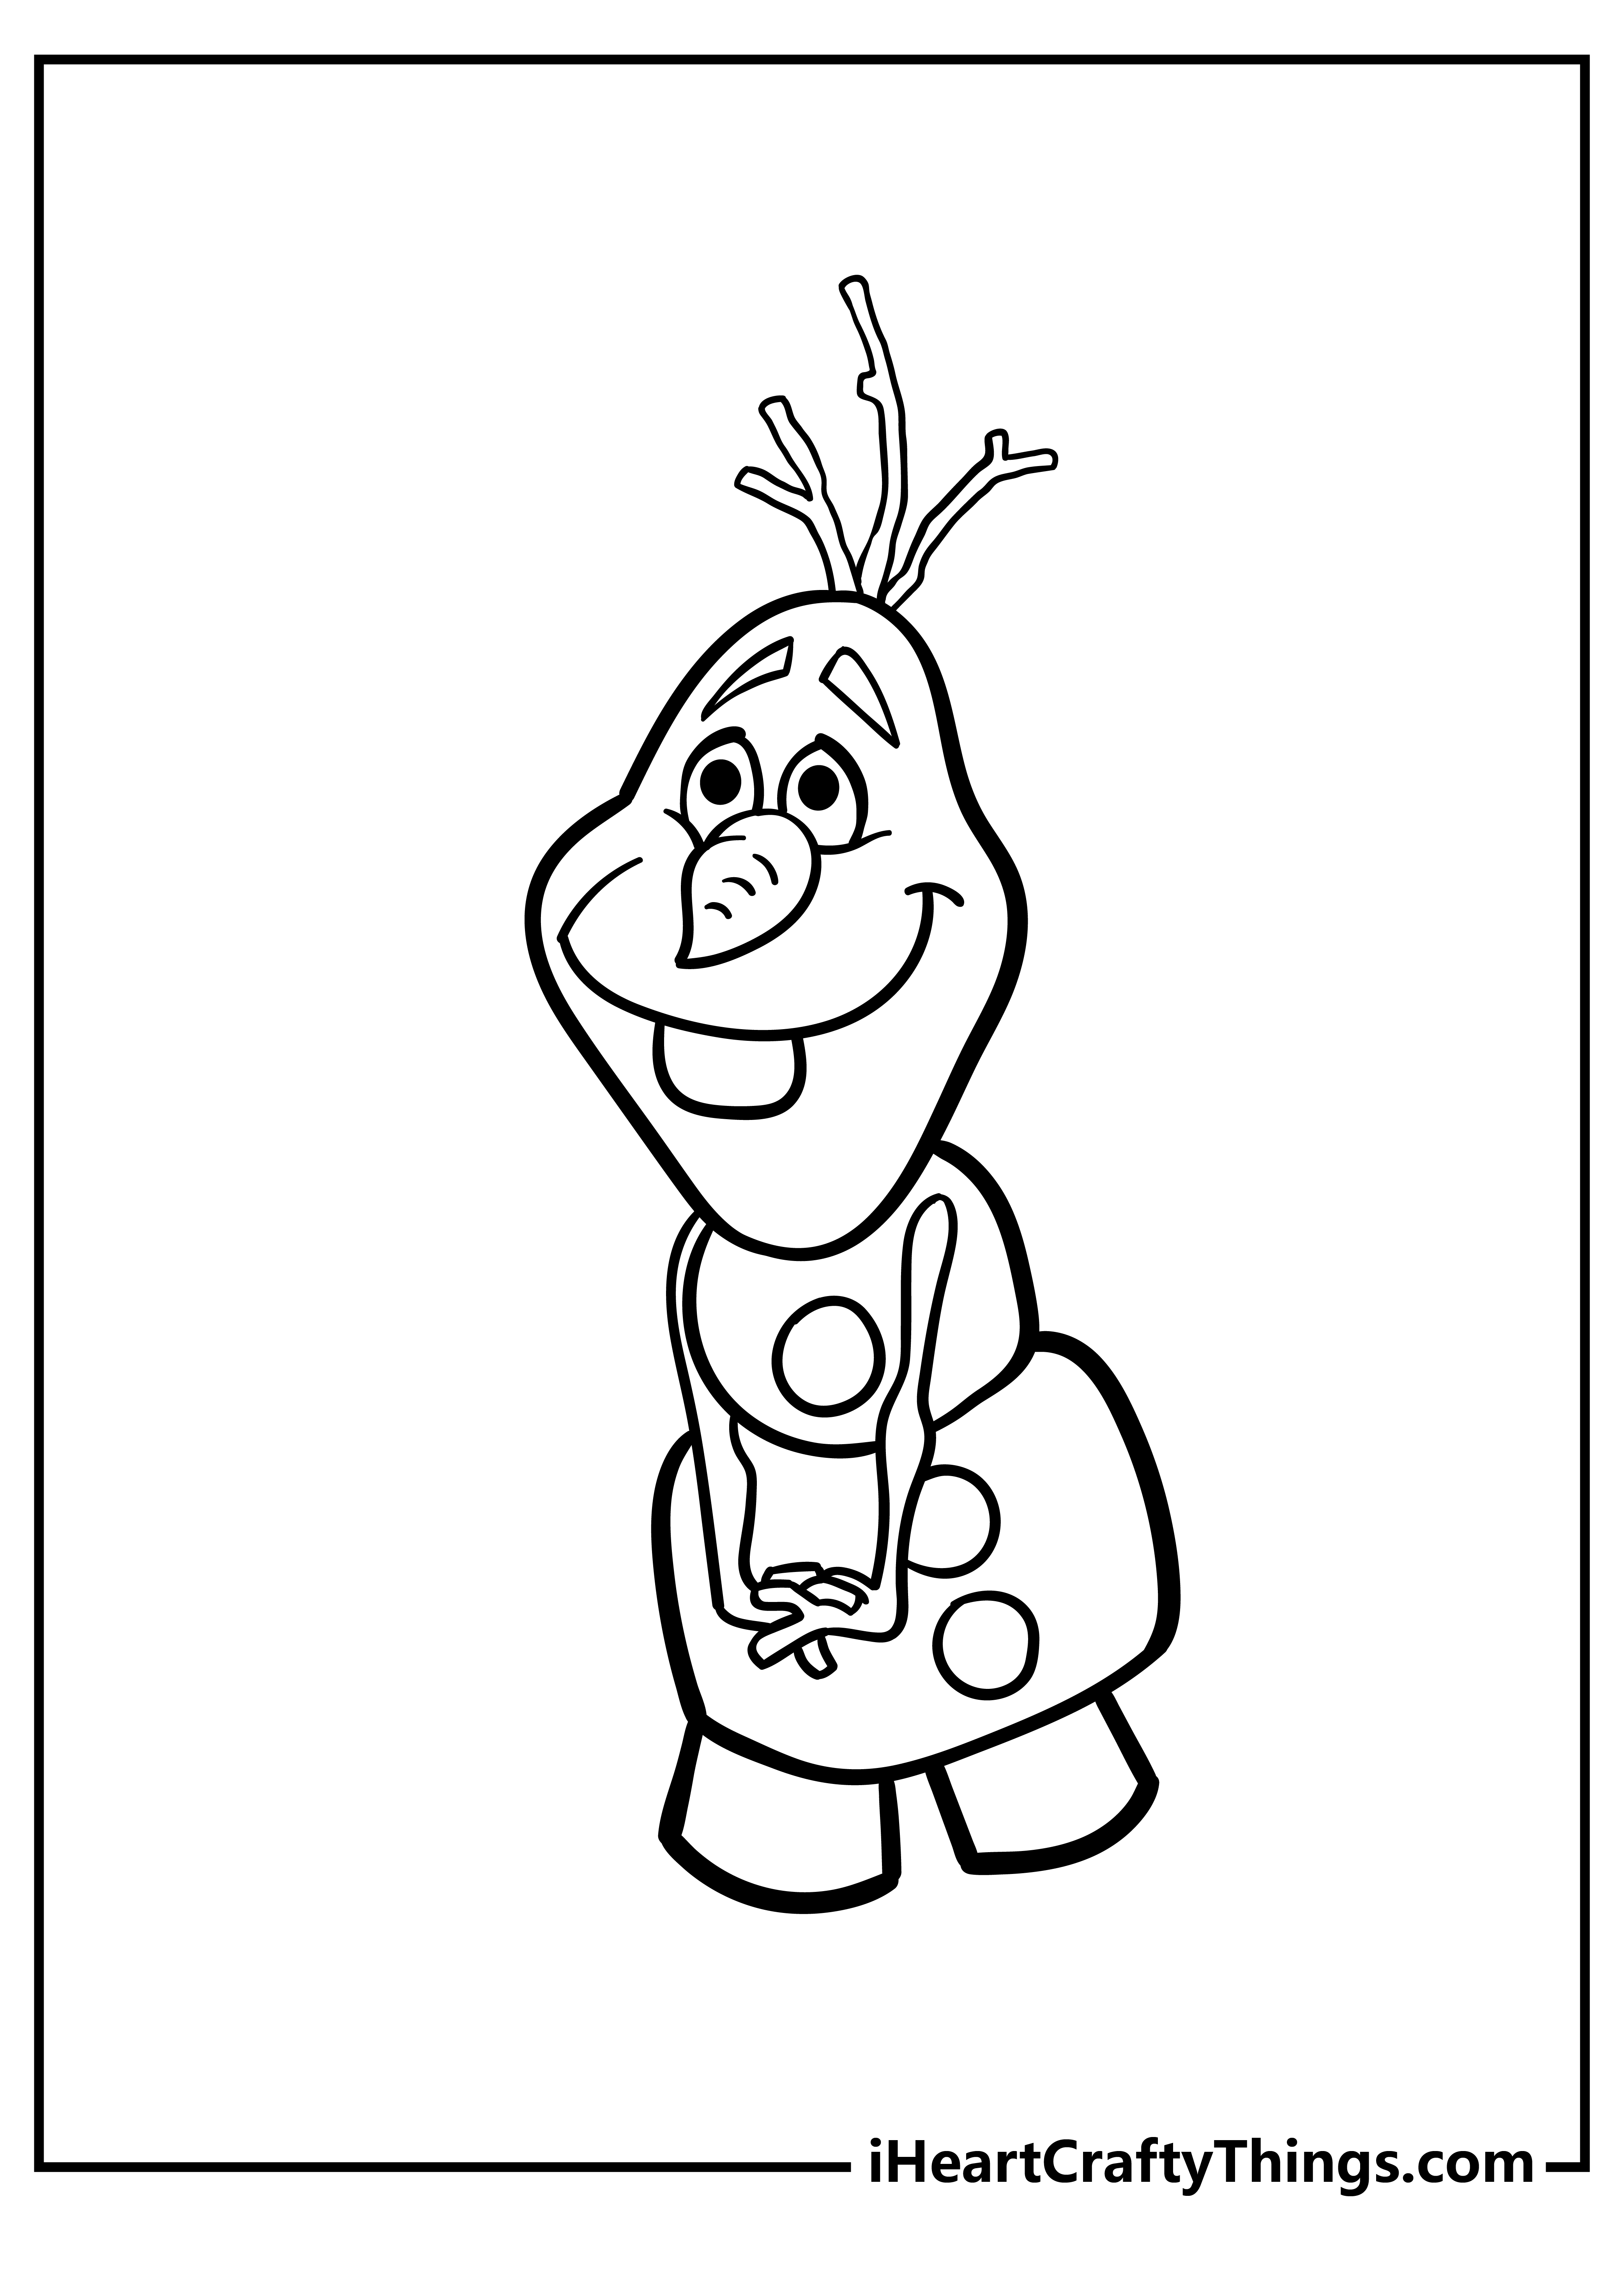 Olaf Coloring Book for adults free download